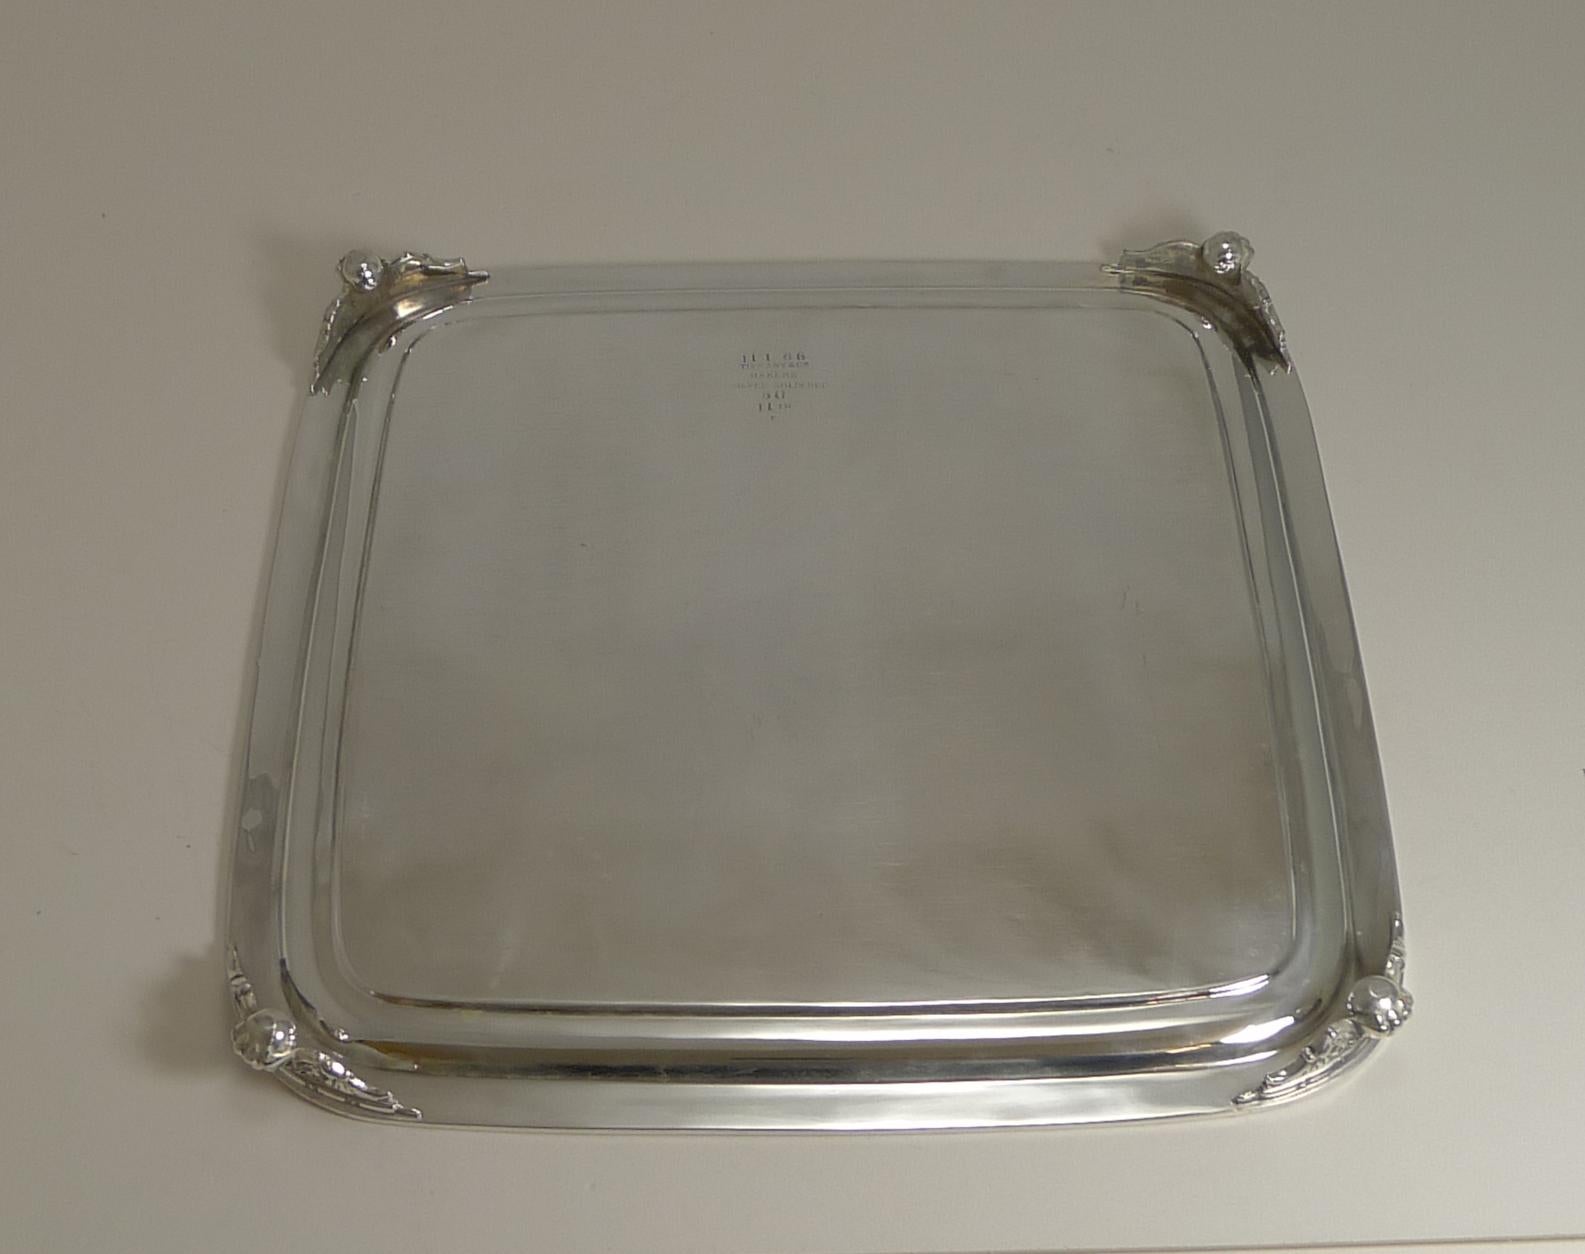 Vintage Tiffany Silver Plated Square Cocktail Tray or Salver 1